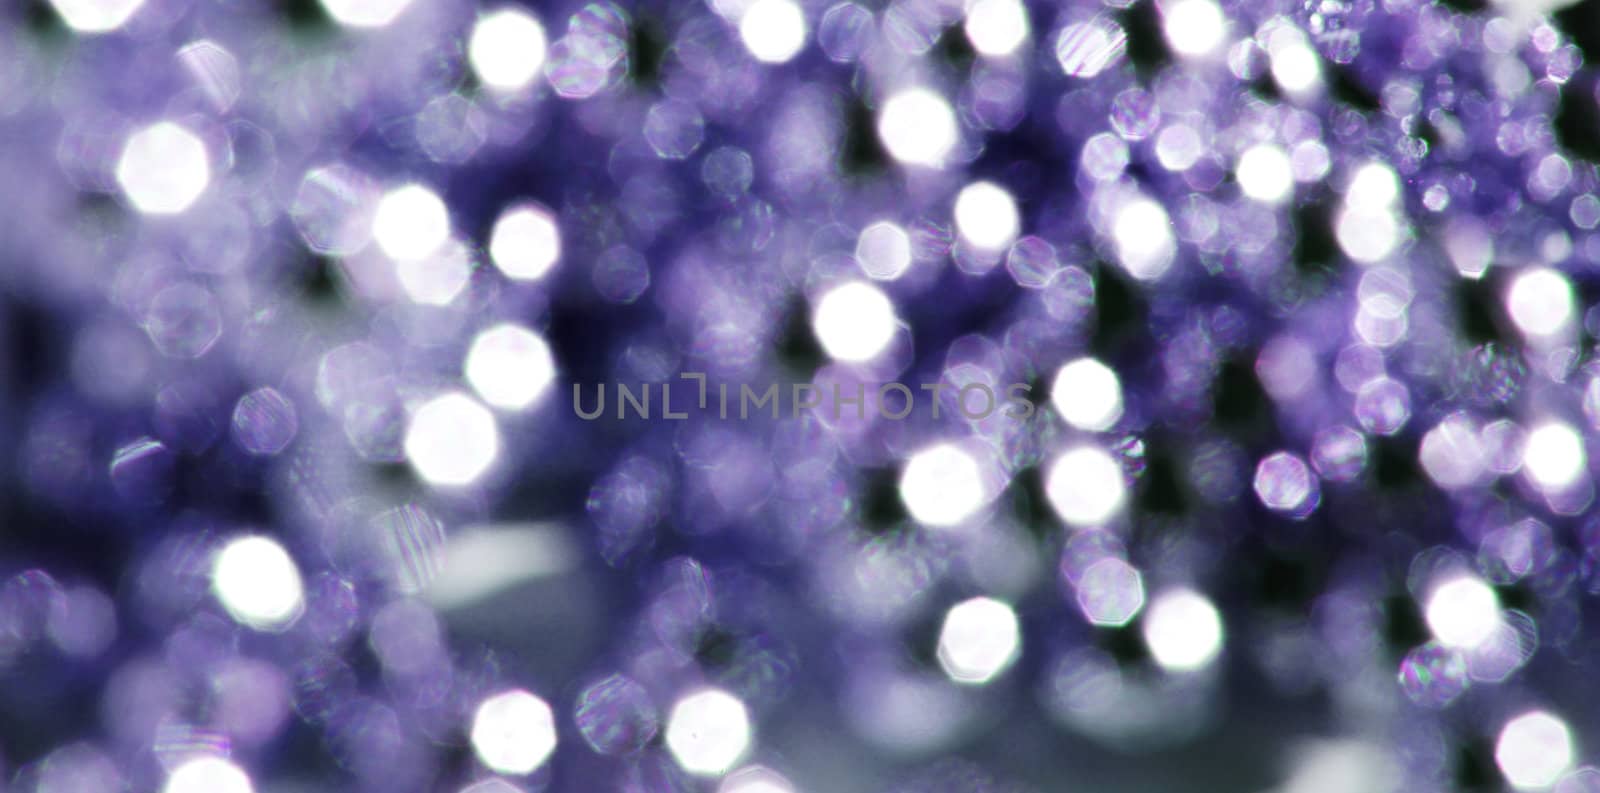 defocused abstract background of color night holiday lights by Elet